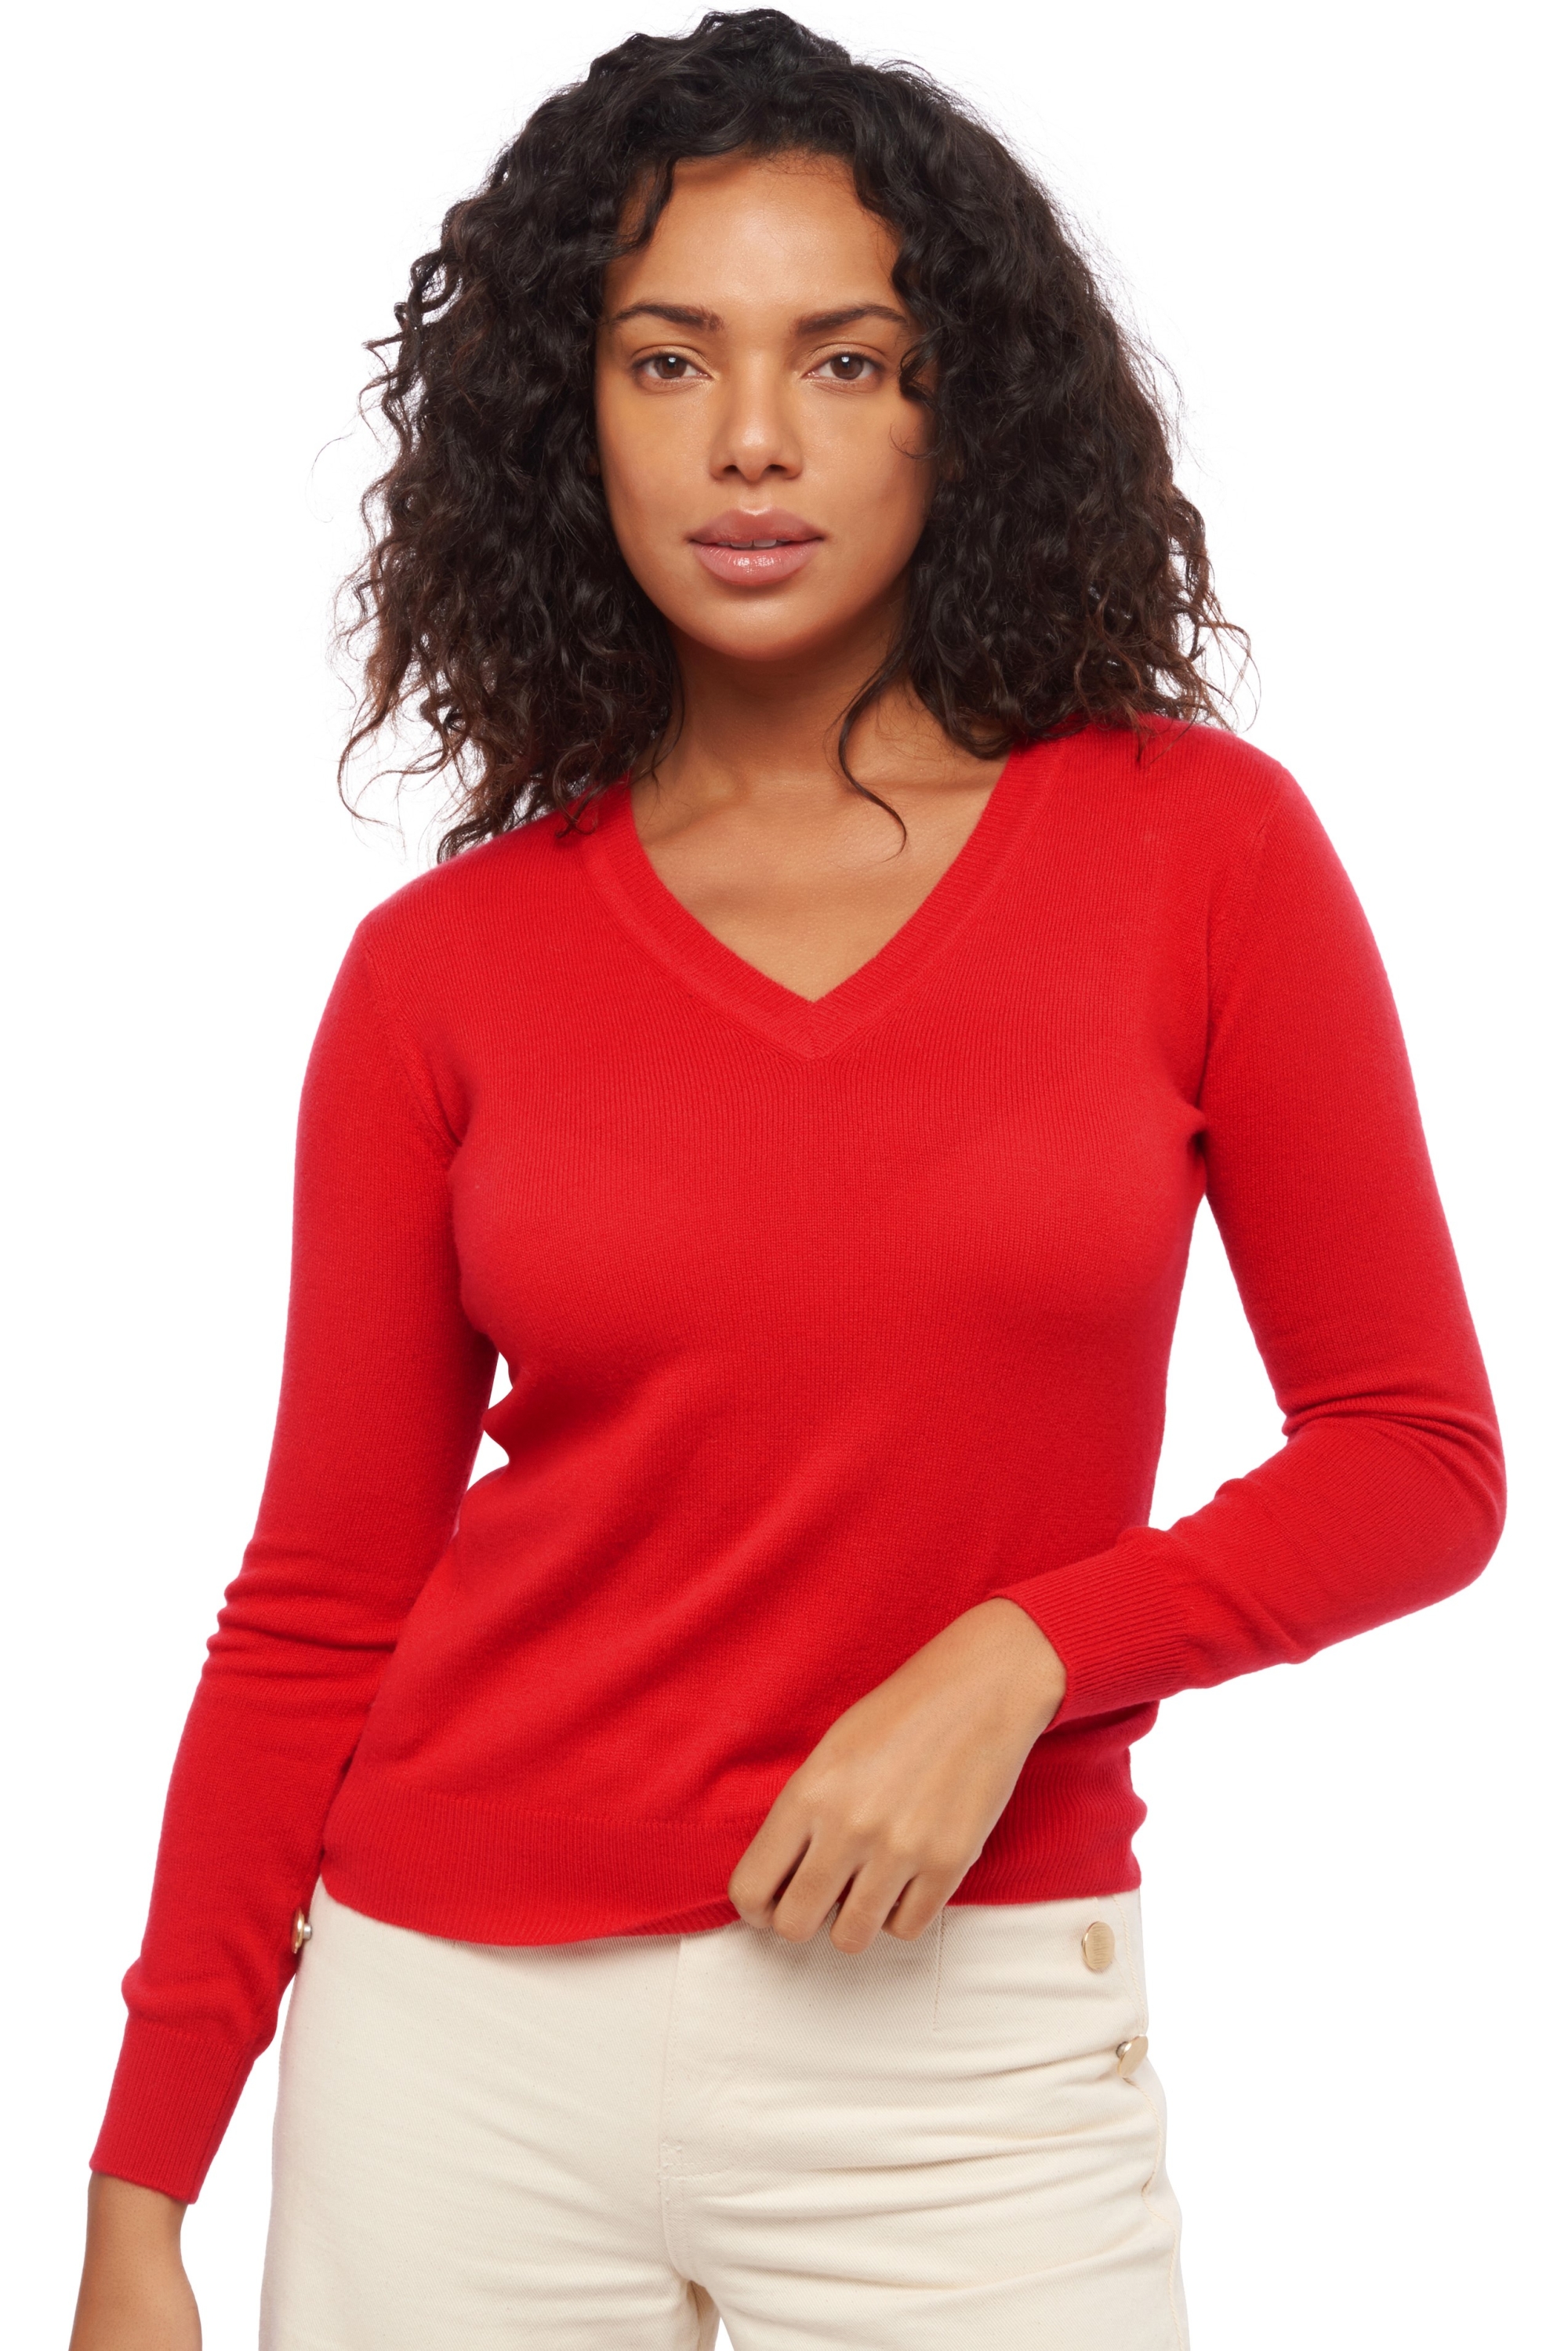 Cashmere ladies timeless classics faustine blood red s